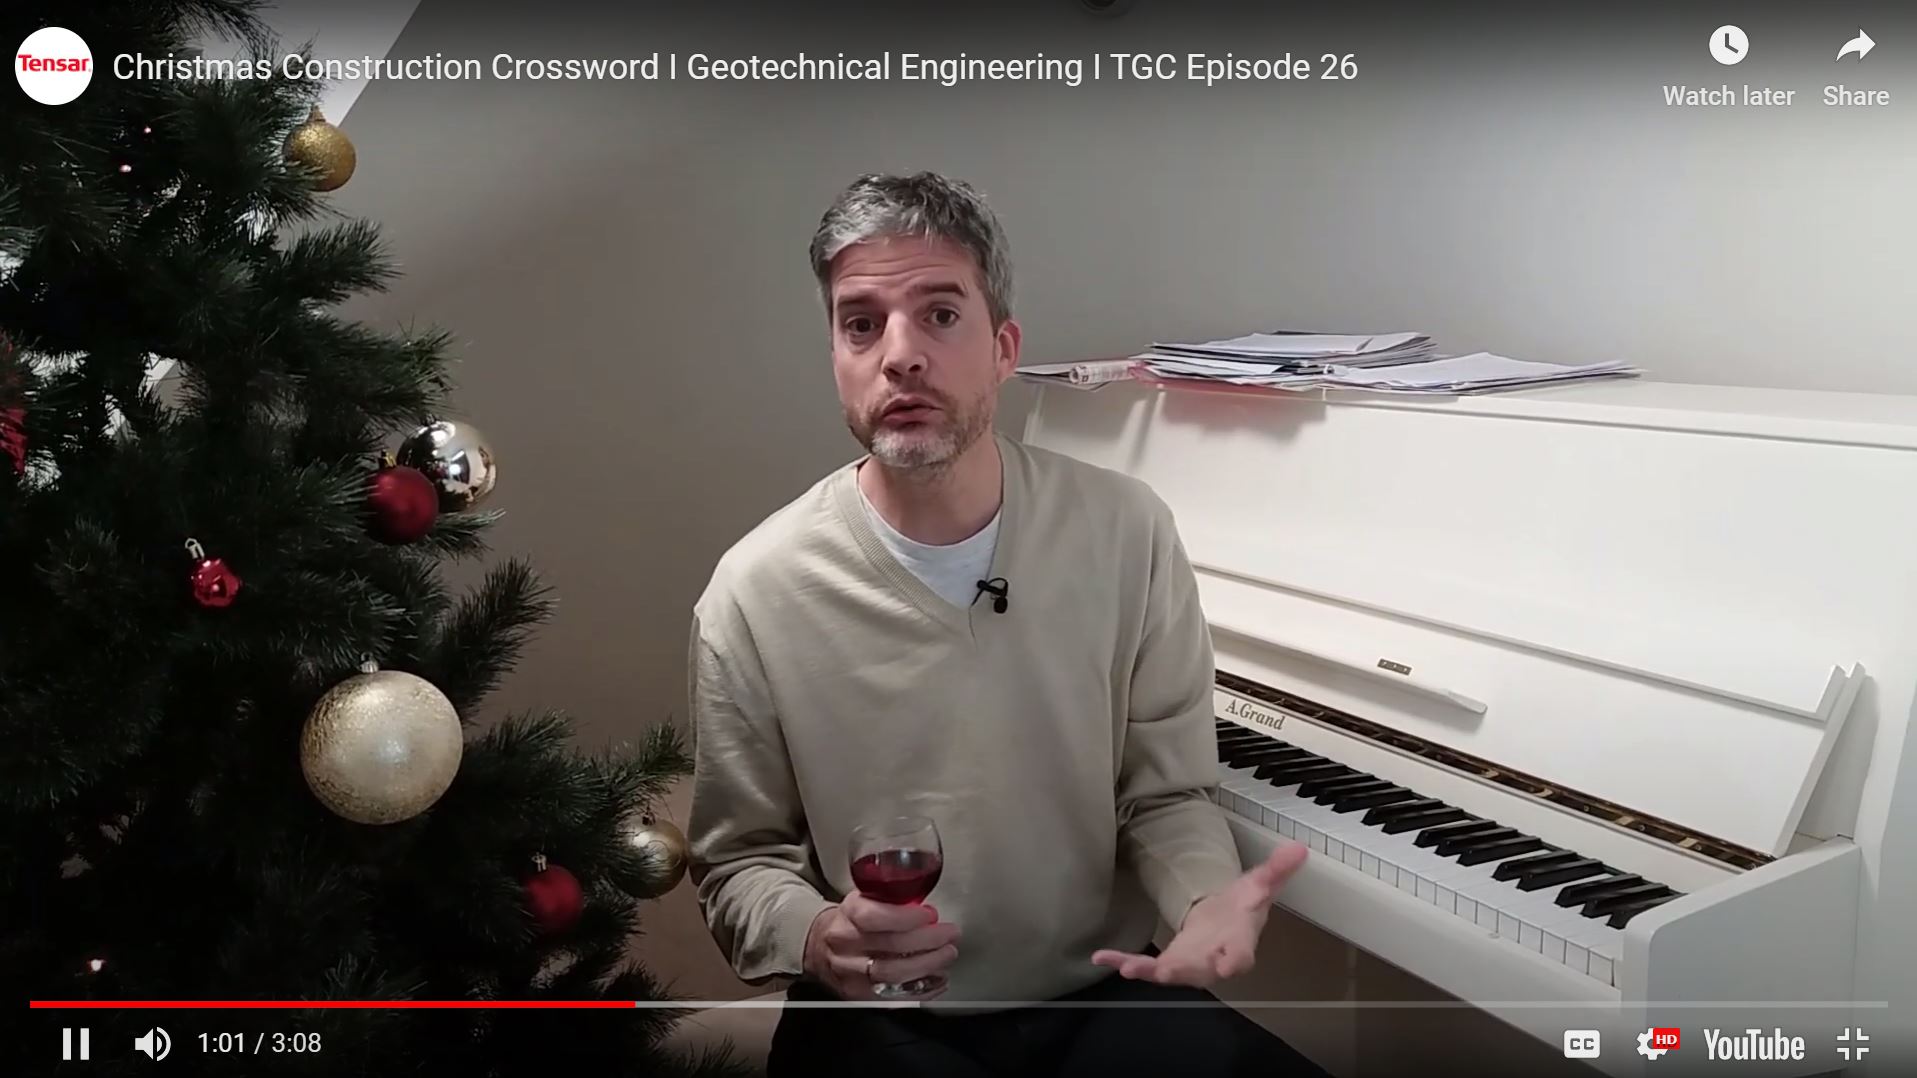 That's a wrap, Merry Quizmas! Andrew concludes Ground Coffee 2020 with a Construction Crossword